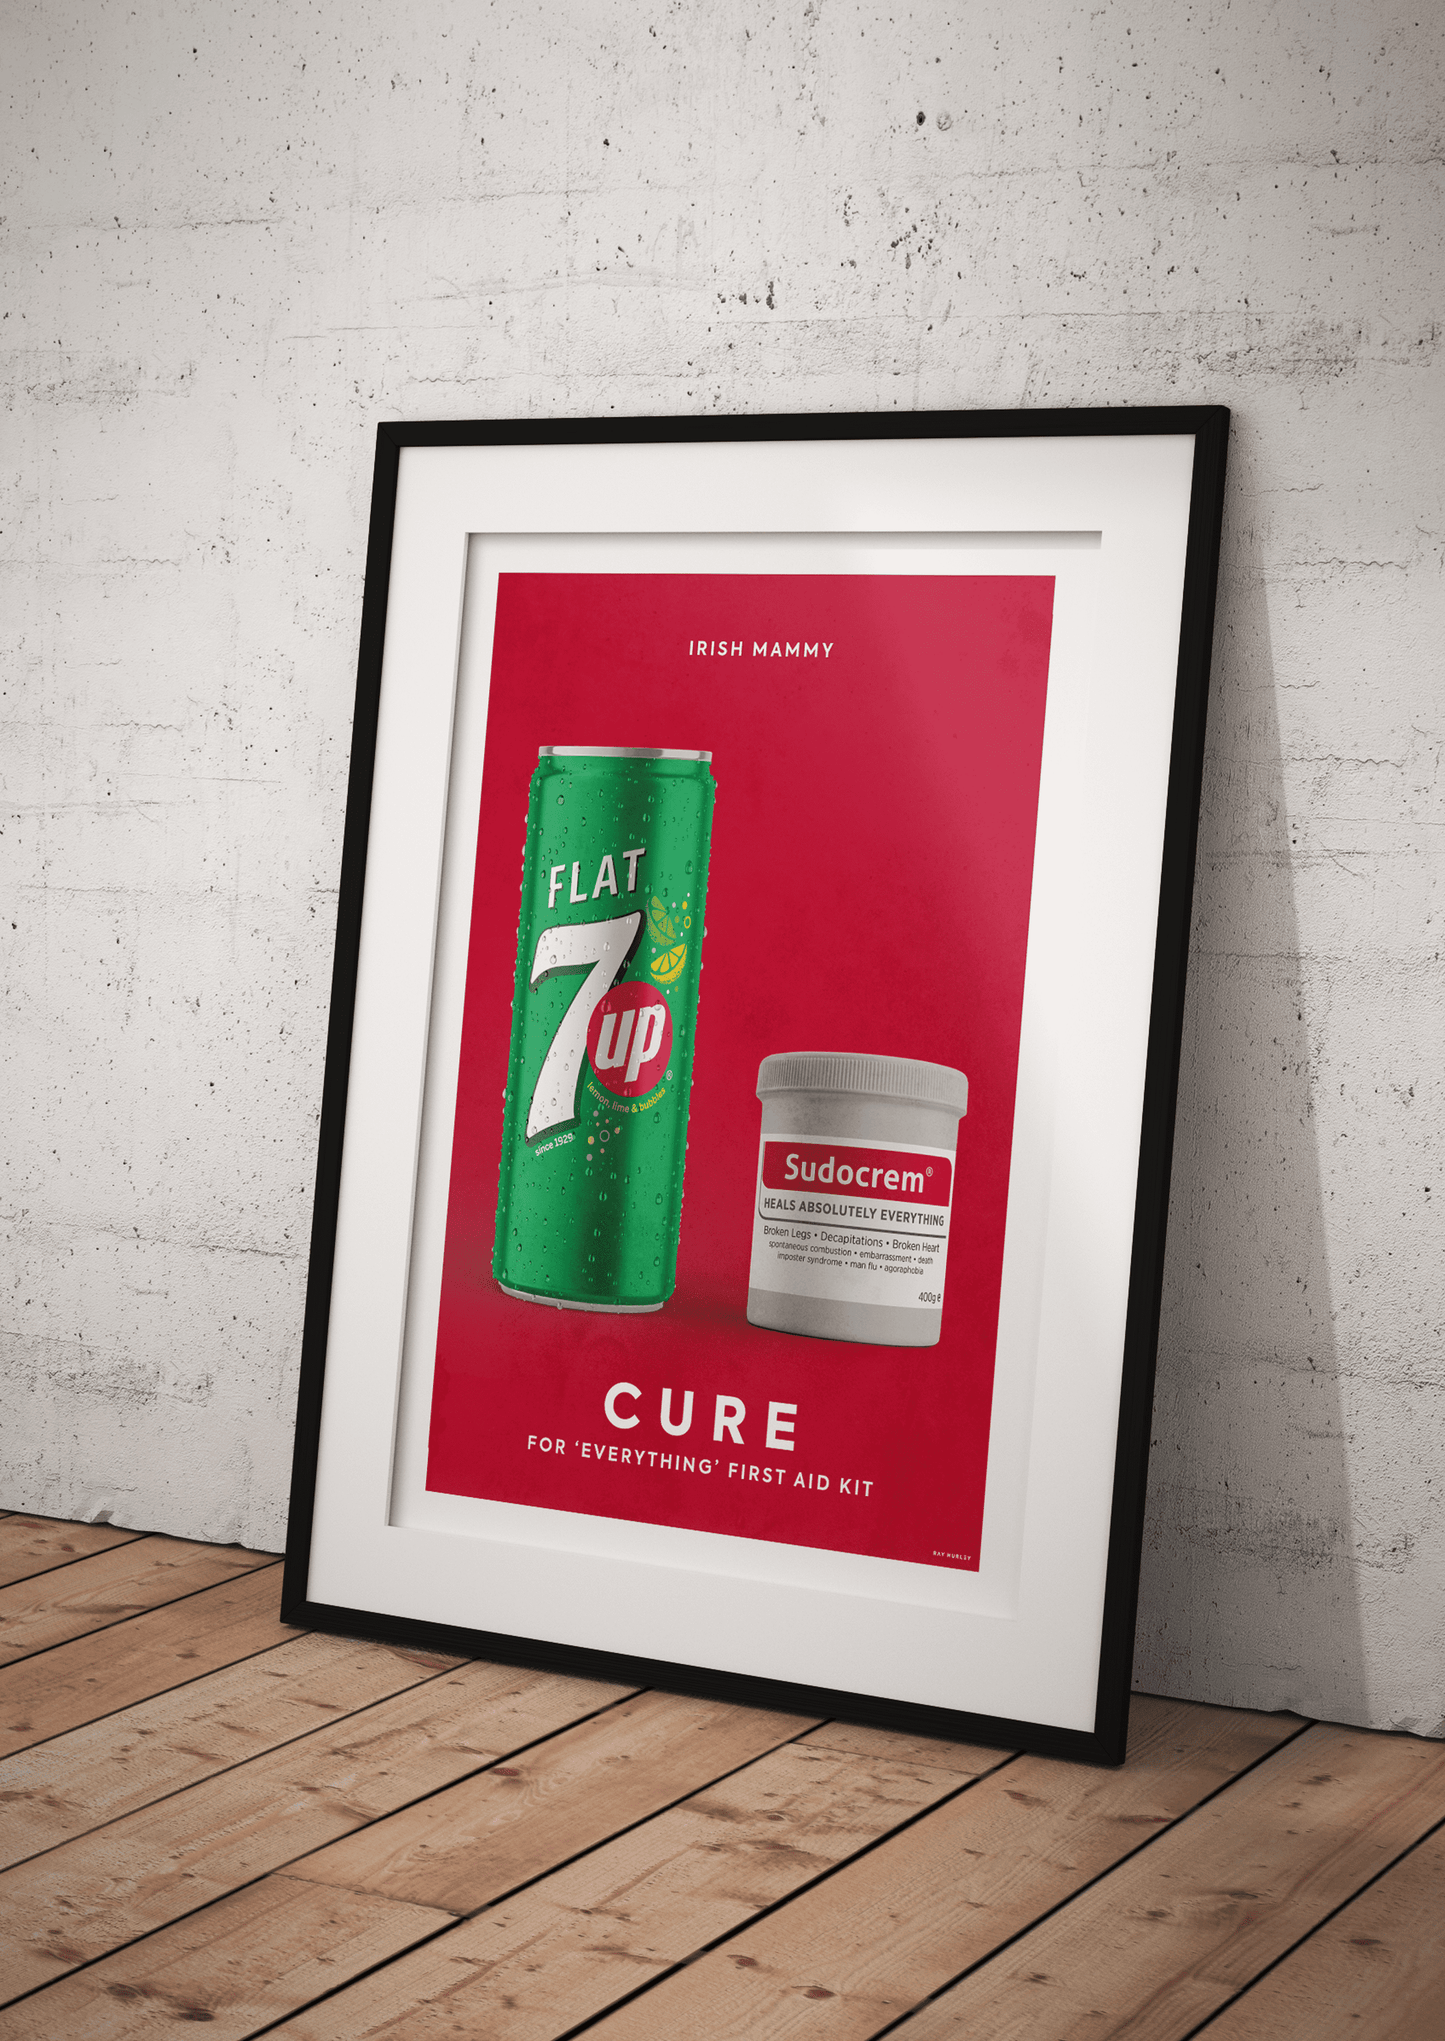 Irish Mammy's Cure for Everything A4 Print